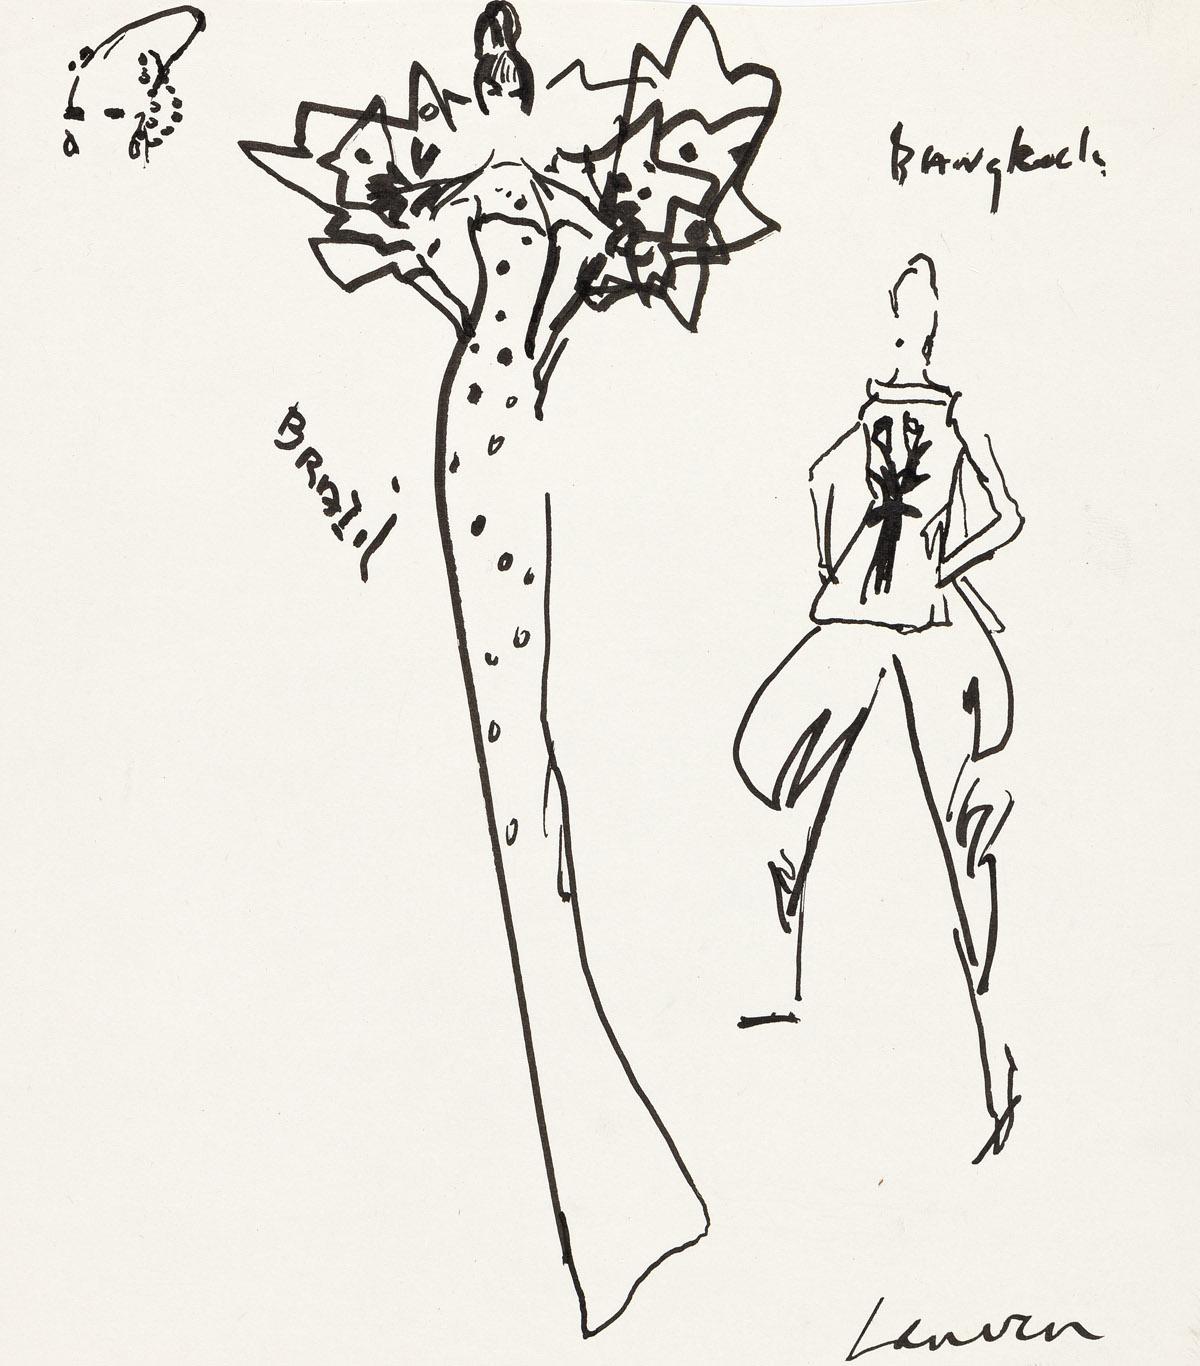 JOE EULA (1925-2004) Archive of over 100 loose fashion sketches and drawings laid into the artists own binder. [GAY ARTIST]